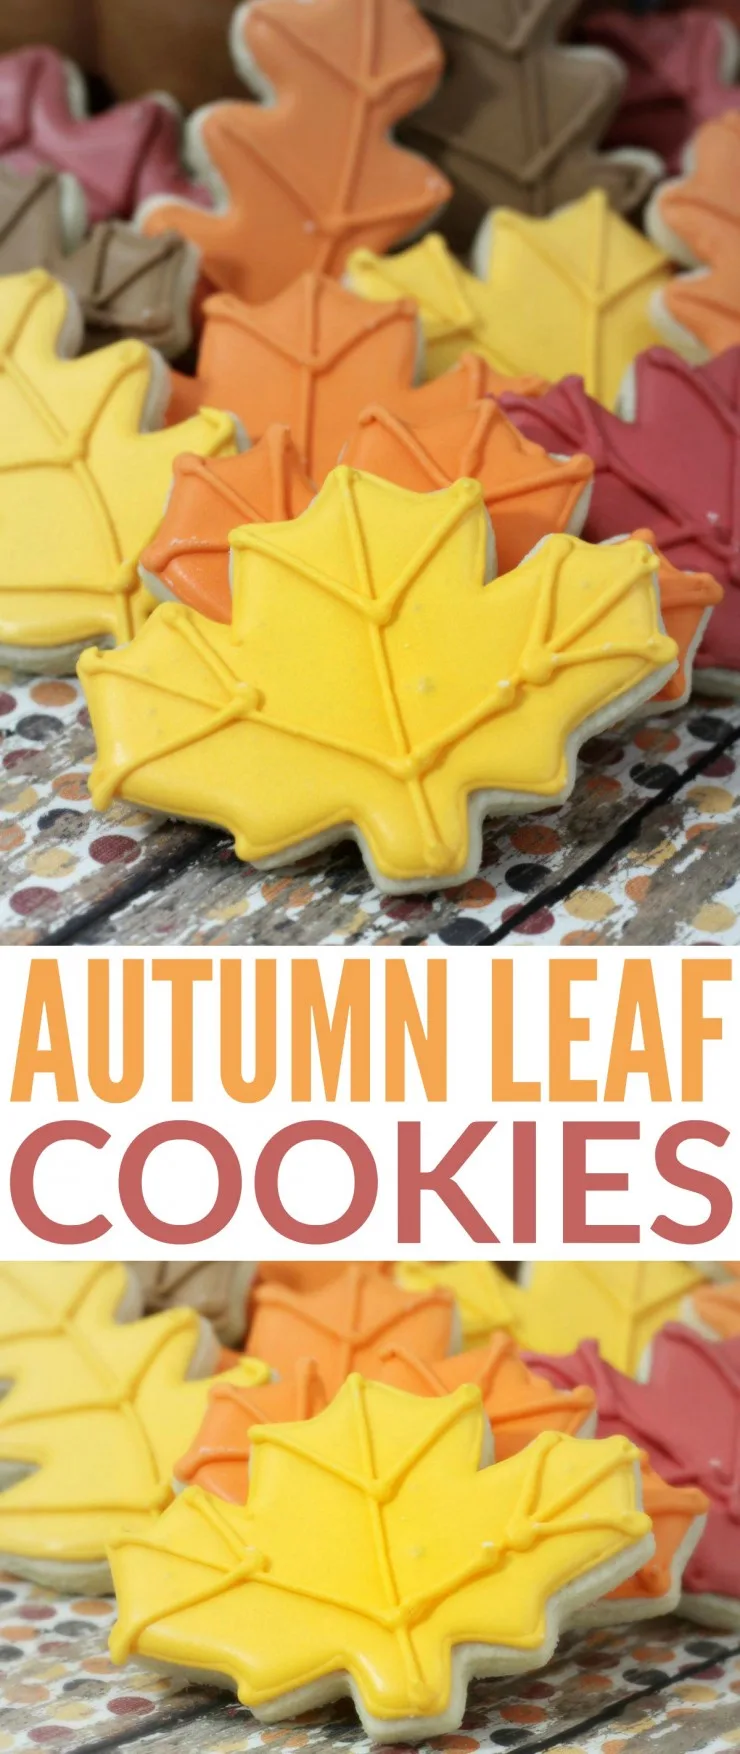 These autumn leaf cookies are almost too pretty to eat. Thankfully this sugar cookie recipe is so delicious and full of flavour you won't feel bad for long!